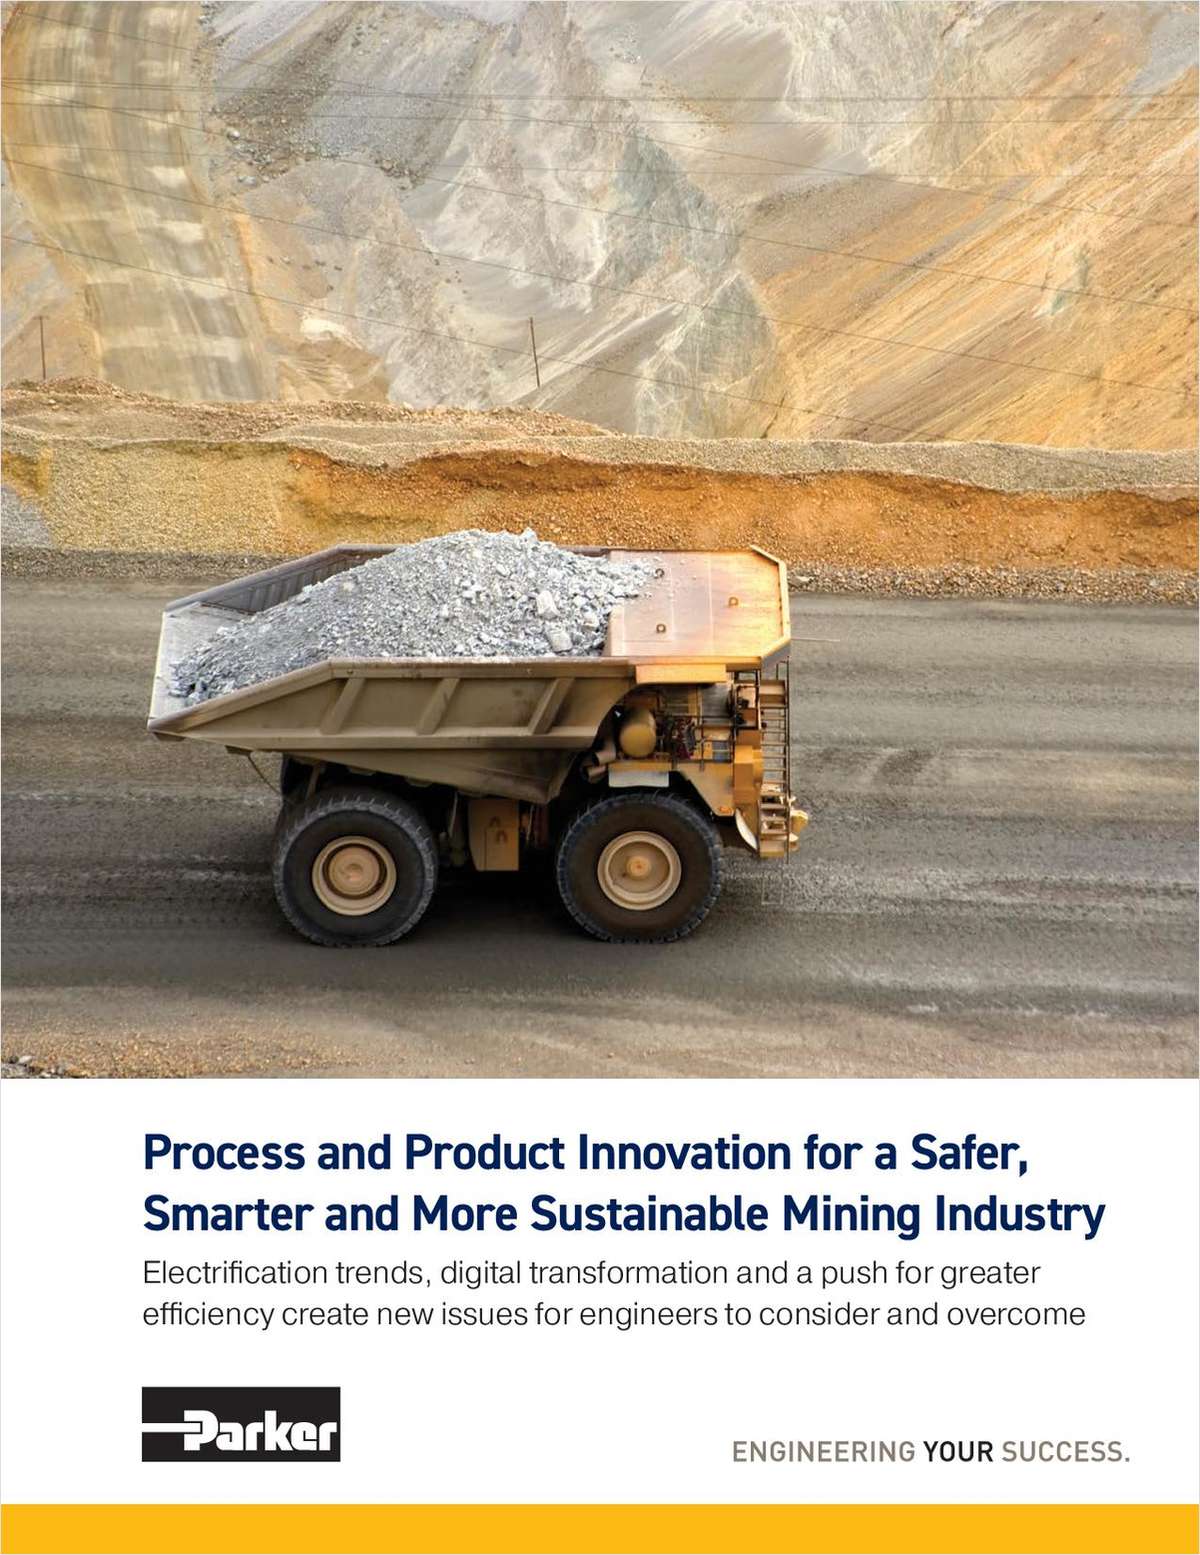 Process and Product Innovation for a Safer, Smarter and More Sustainable Mining Industry